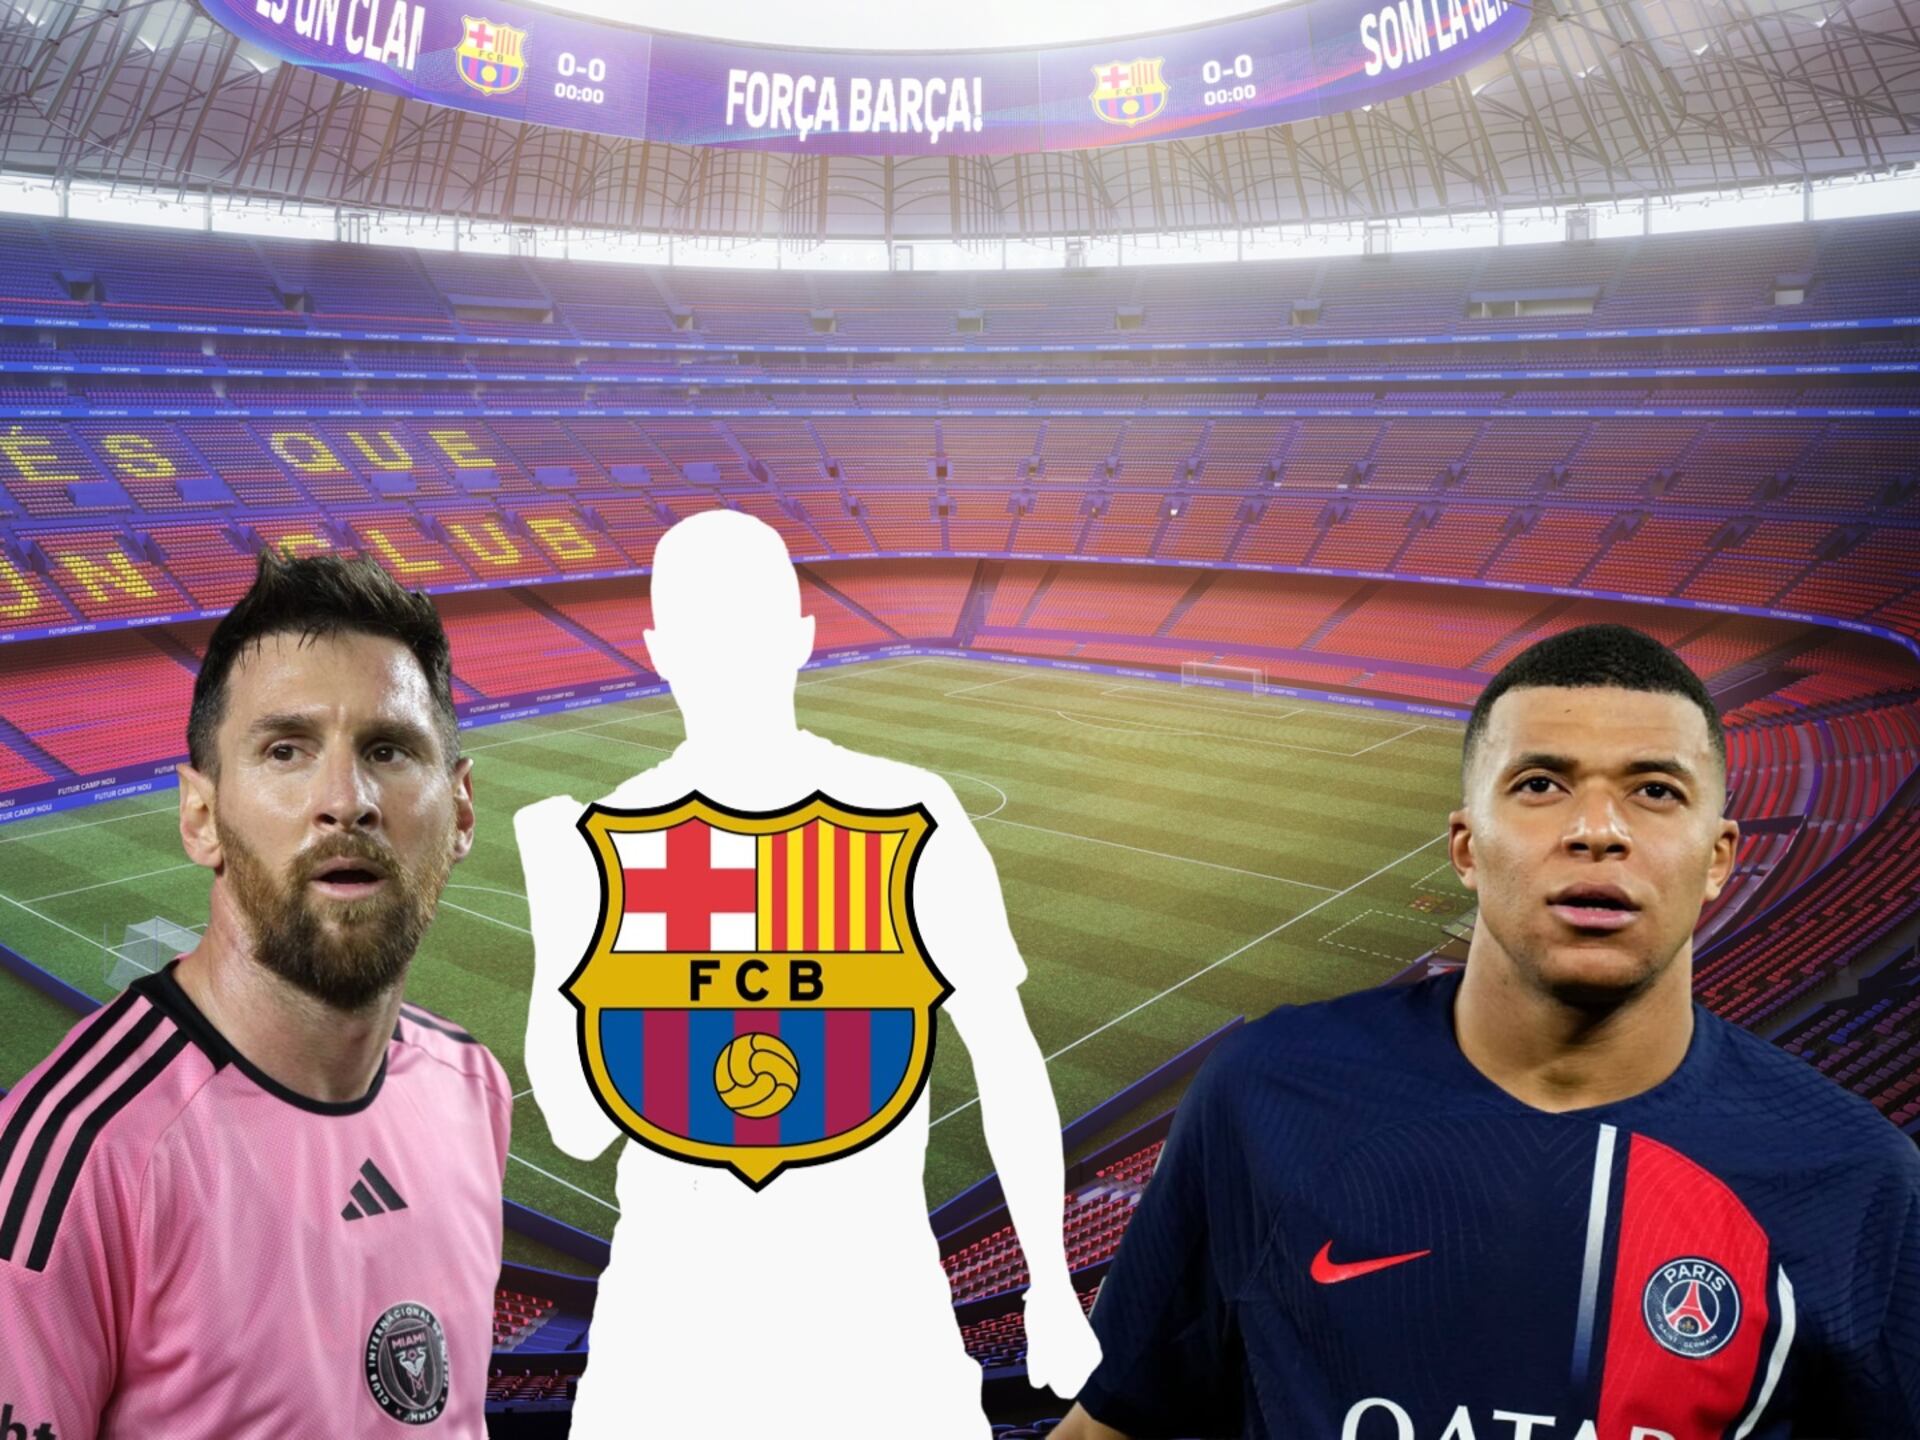 Messi's friend that FC Barcelona wants to sign for $30m to stop Mbappé, it wouldn't be the best deal for Barca